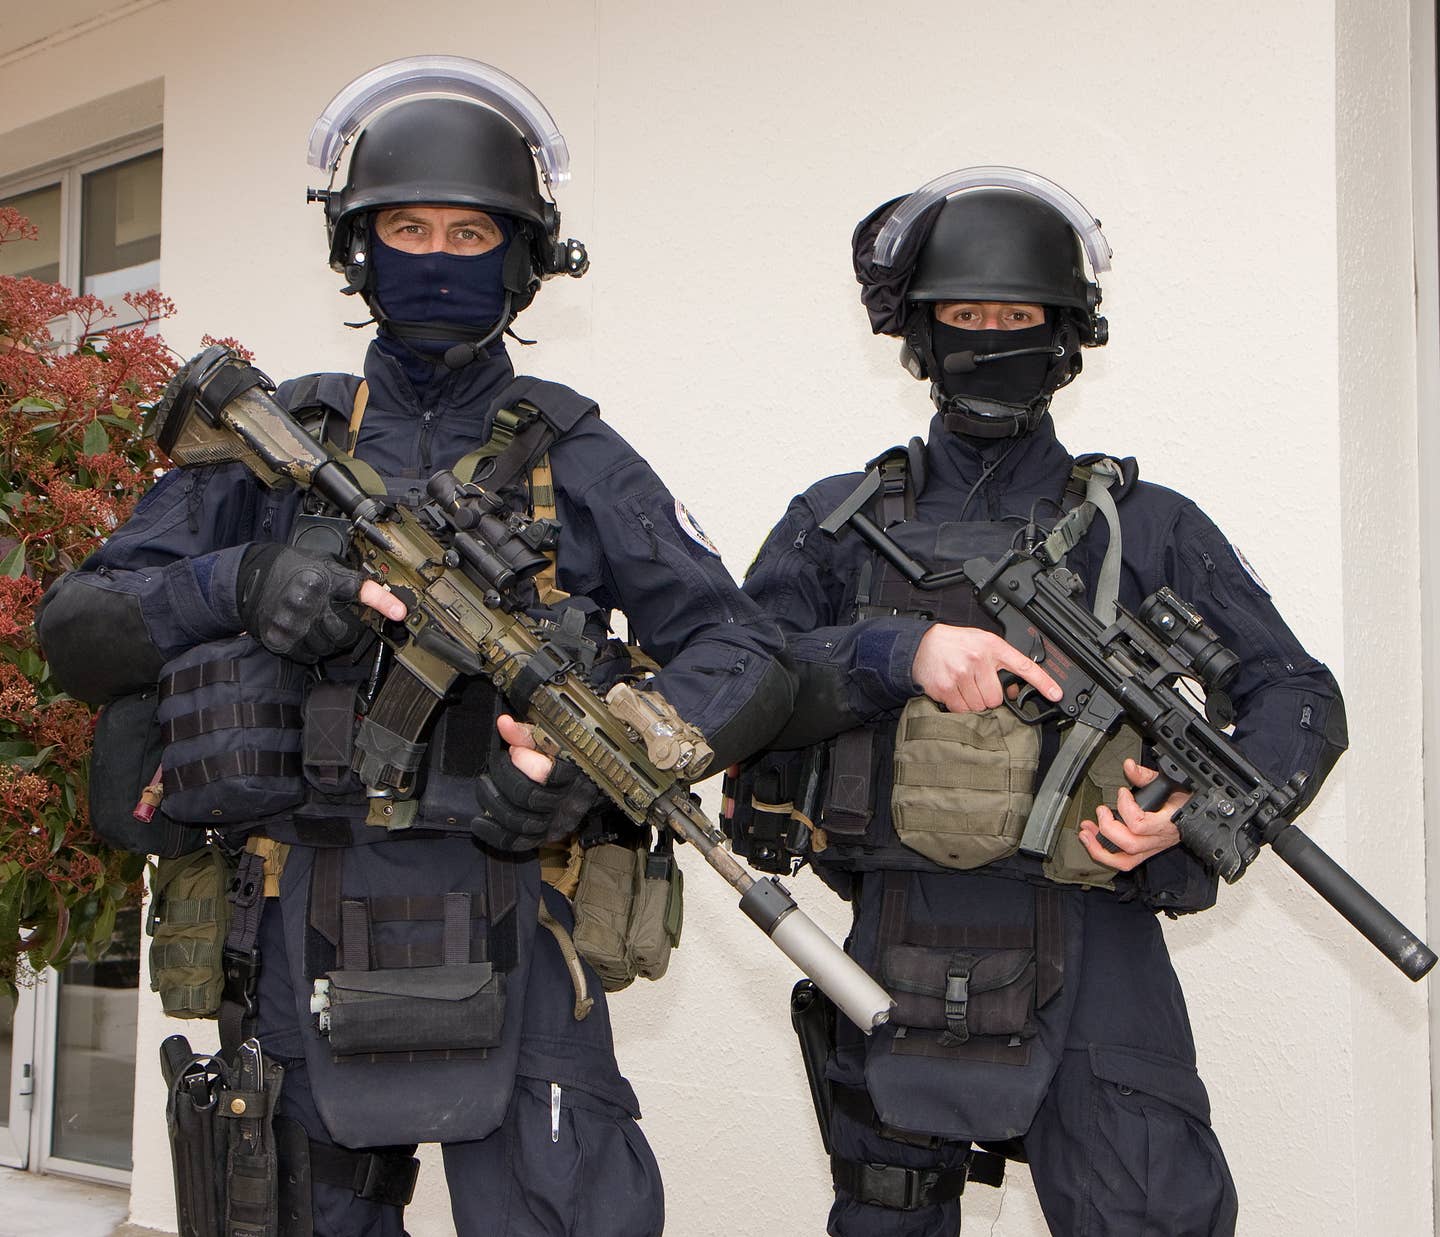 GIGN commandos with rifles and submachine guns